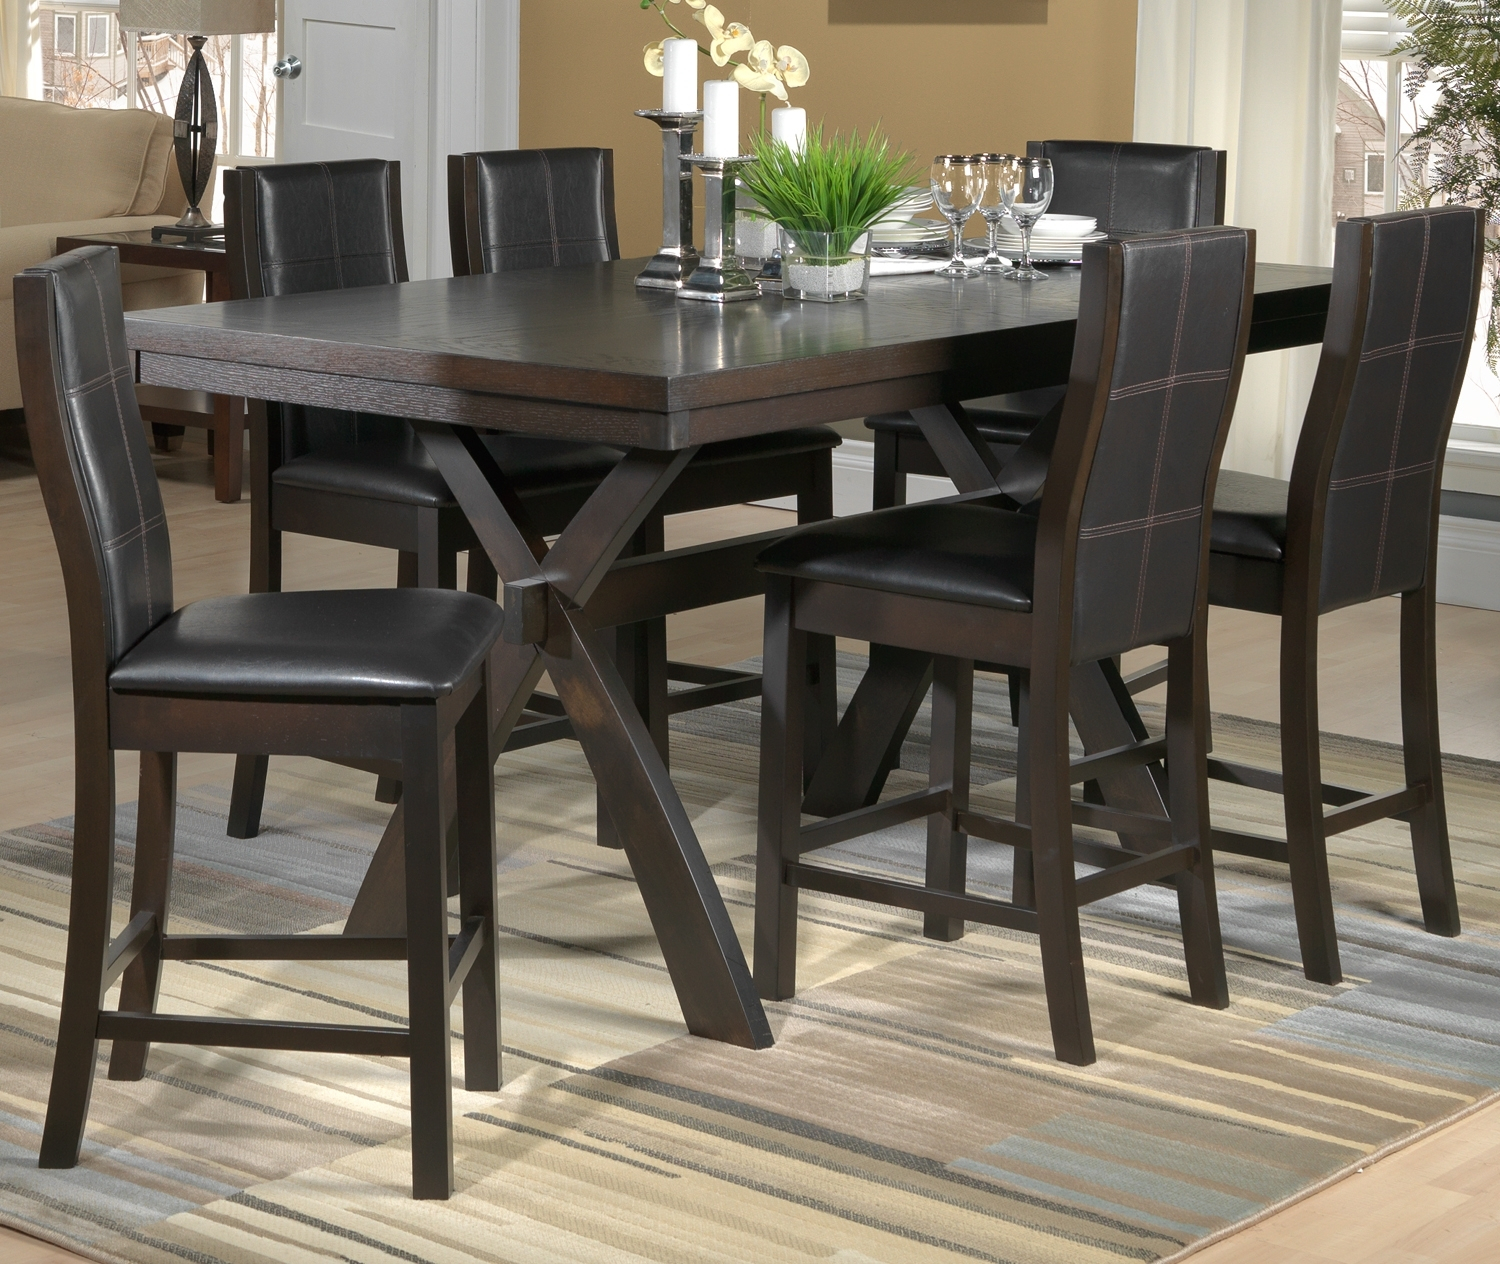 Leons Dining Room Sets Domainmichael Layjao with dimensions 1500 X 1264